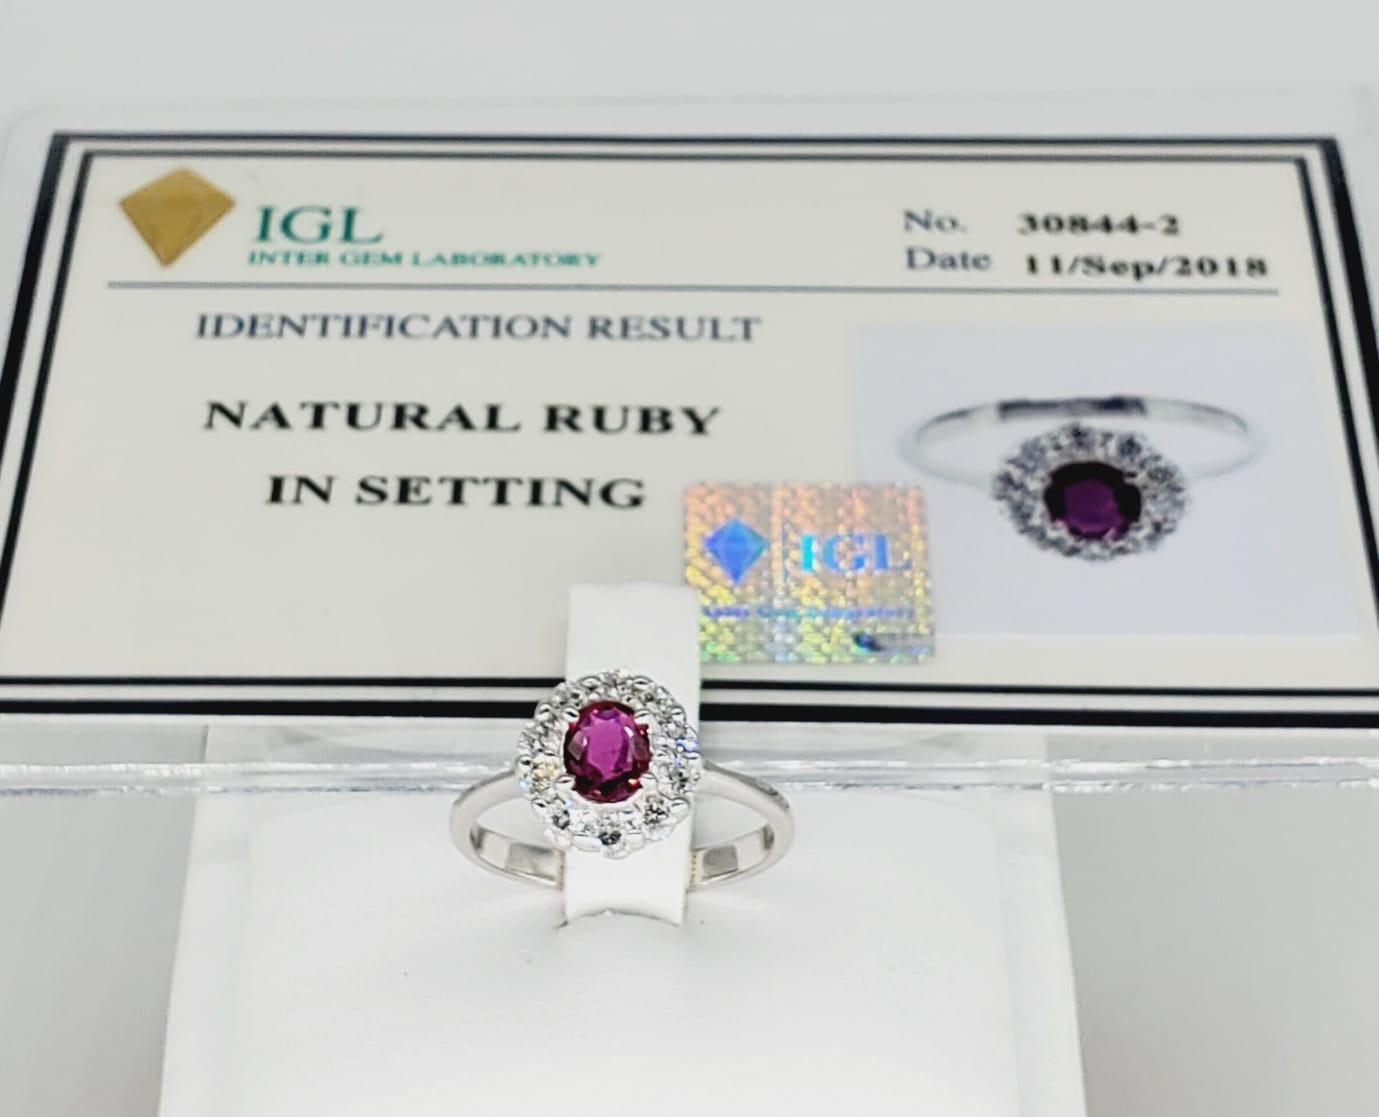 Vintage 1.00 Carat Natural Ruby and Diamonds Halo Ring 14k White Gold. The Ruby weights 0.50ct and the Diamonds weight approx 0.50 carat. The ring is a size 6 and weights approx 3.4 grams 14k white gold.